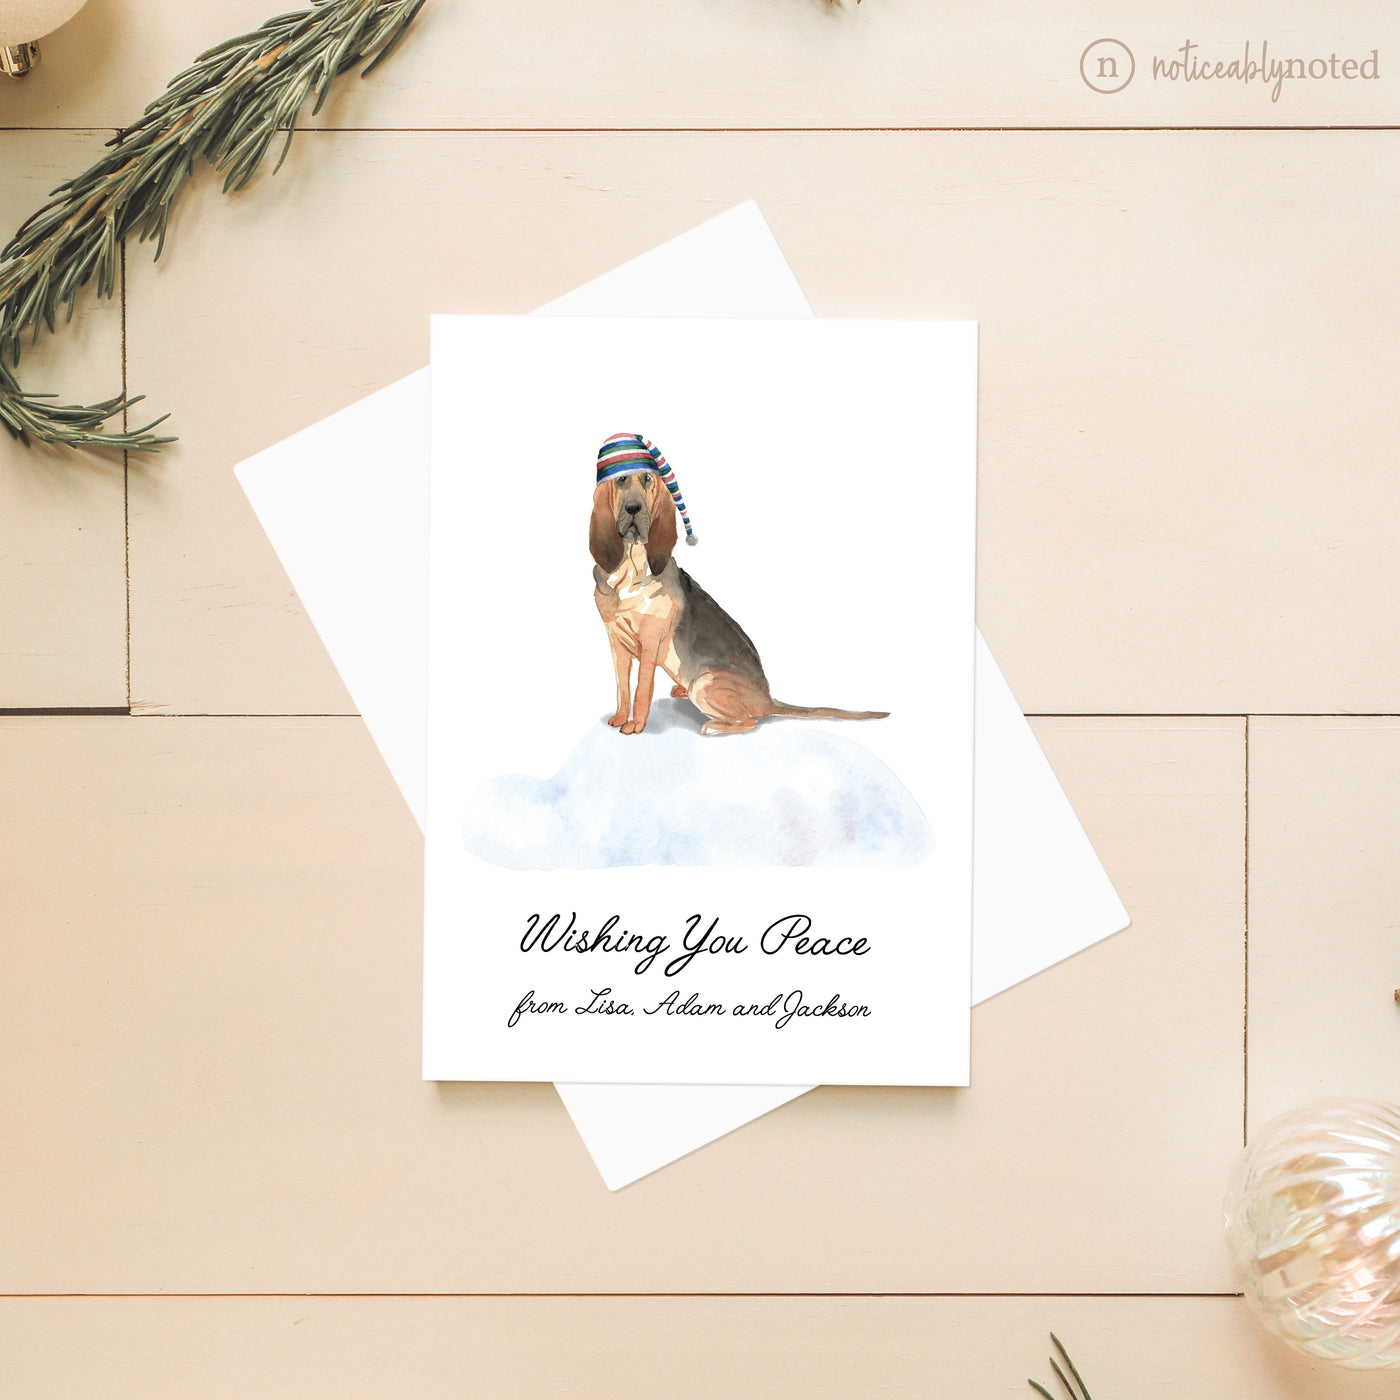 Bloodhound Dog Holiday Greeting Cards | Noticeably Noted